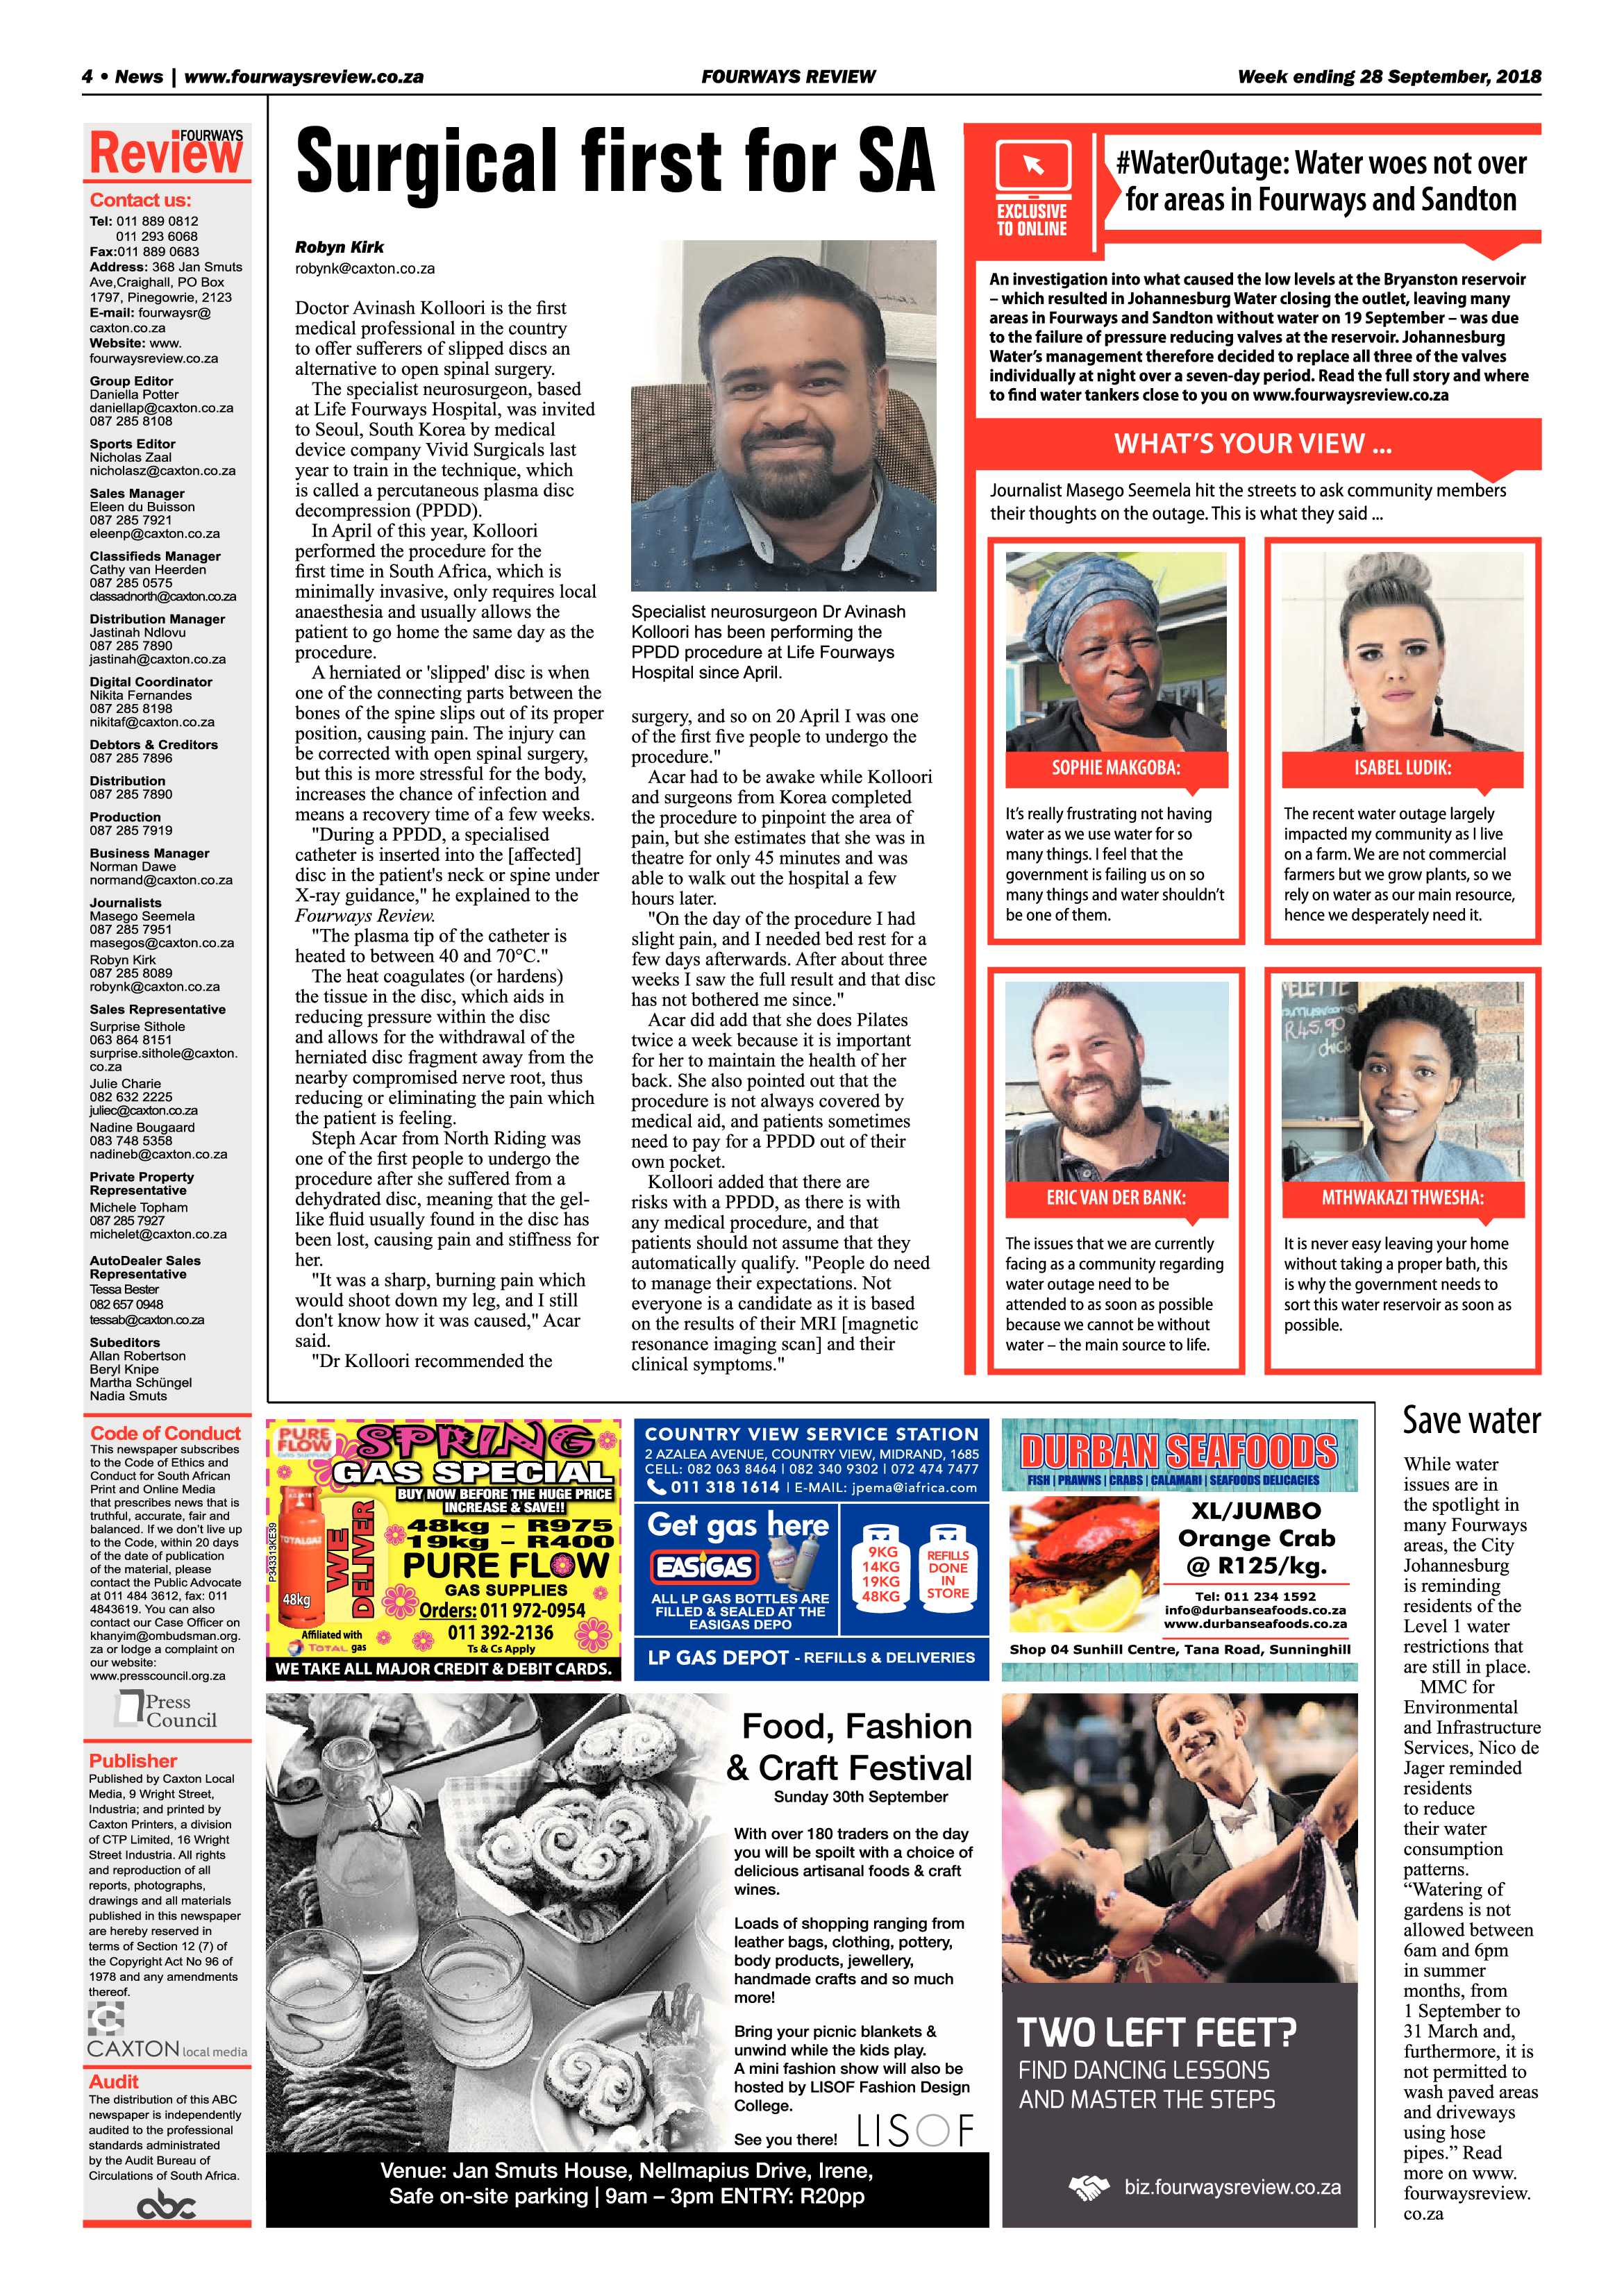 Fourways Review 28 September, 2018 page 4